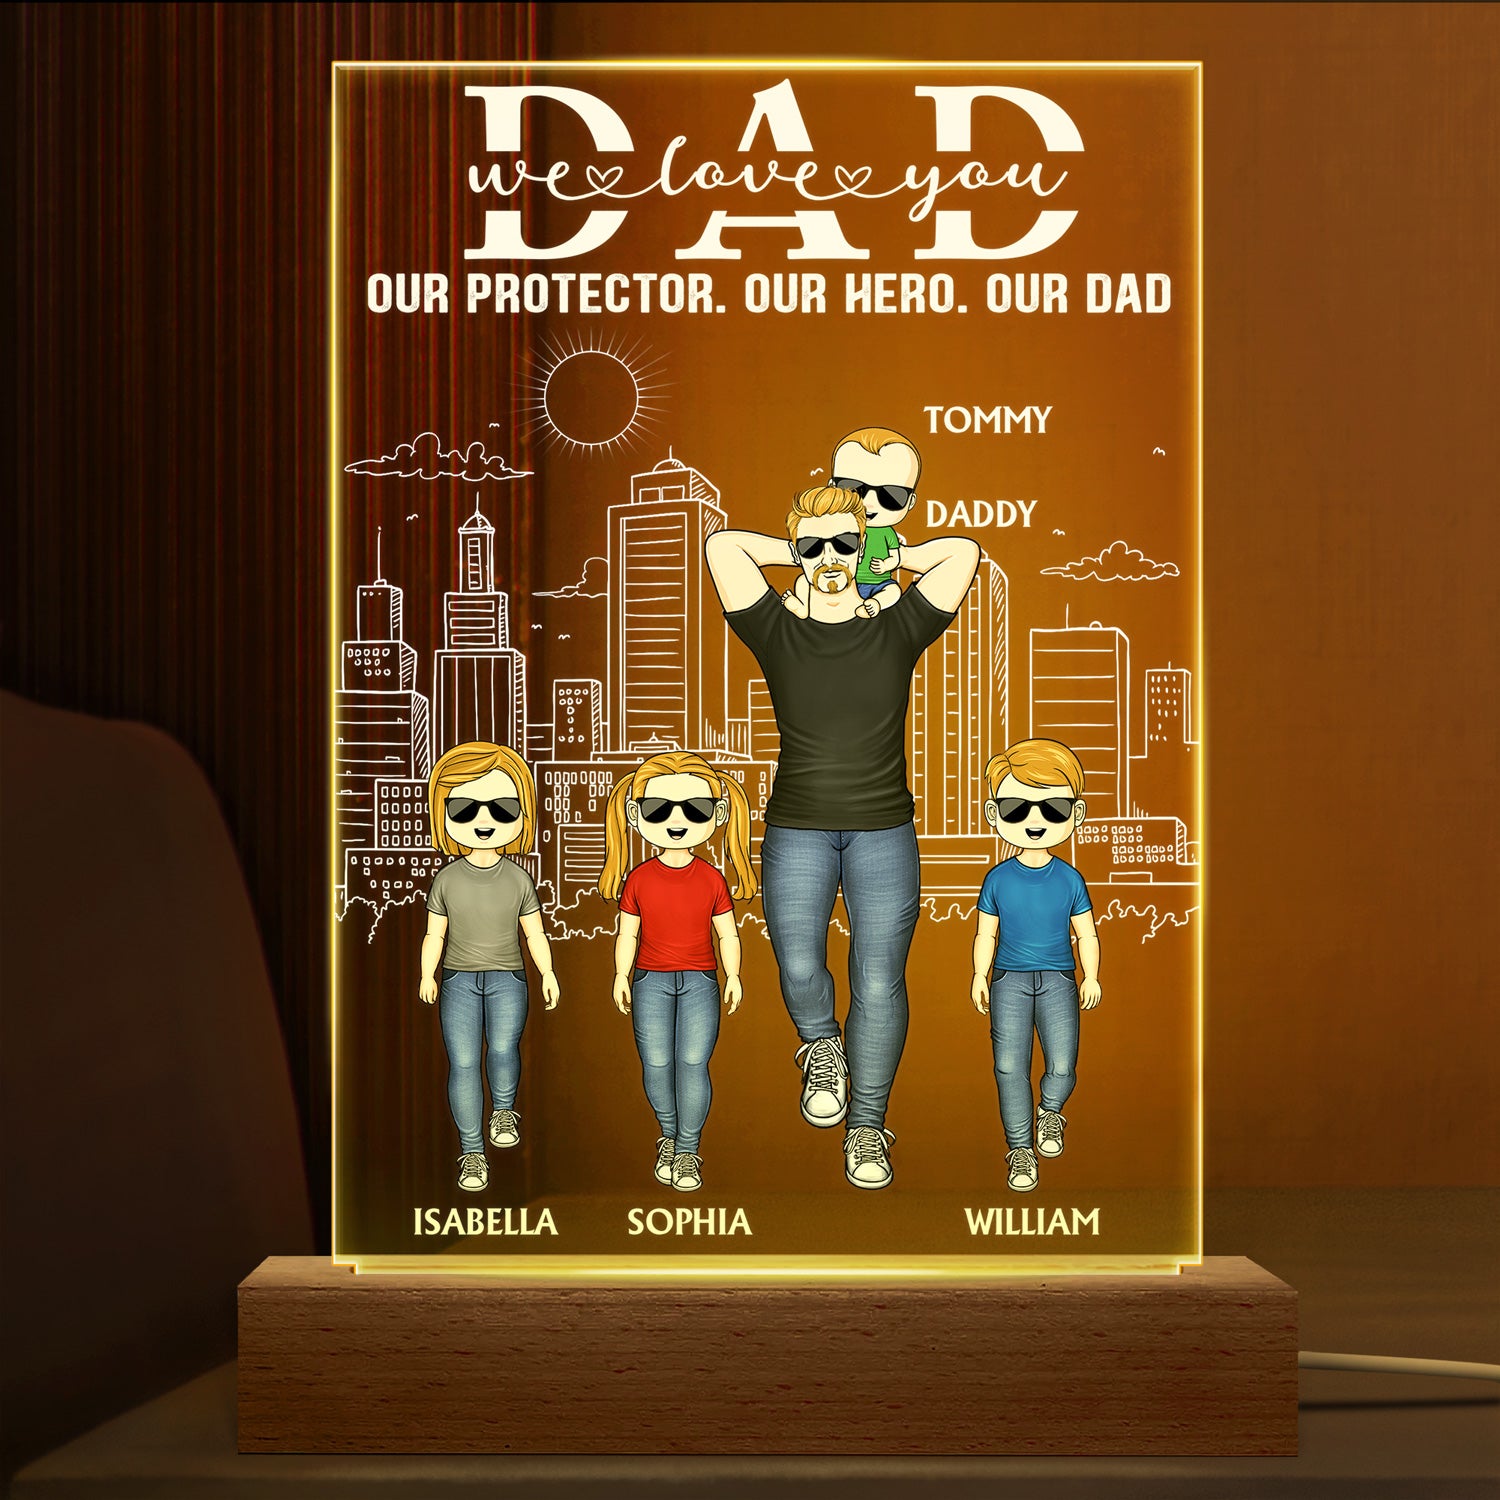 Daddy Our Protector Our Hero Our Dad - Birthday Gift For Father, Family - Personalized Custom 3D Led Light Wooden Base